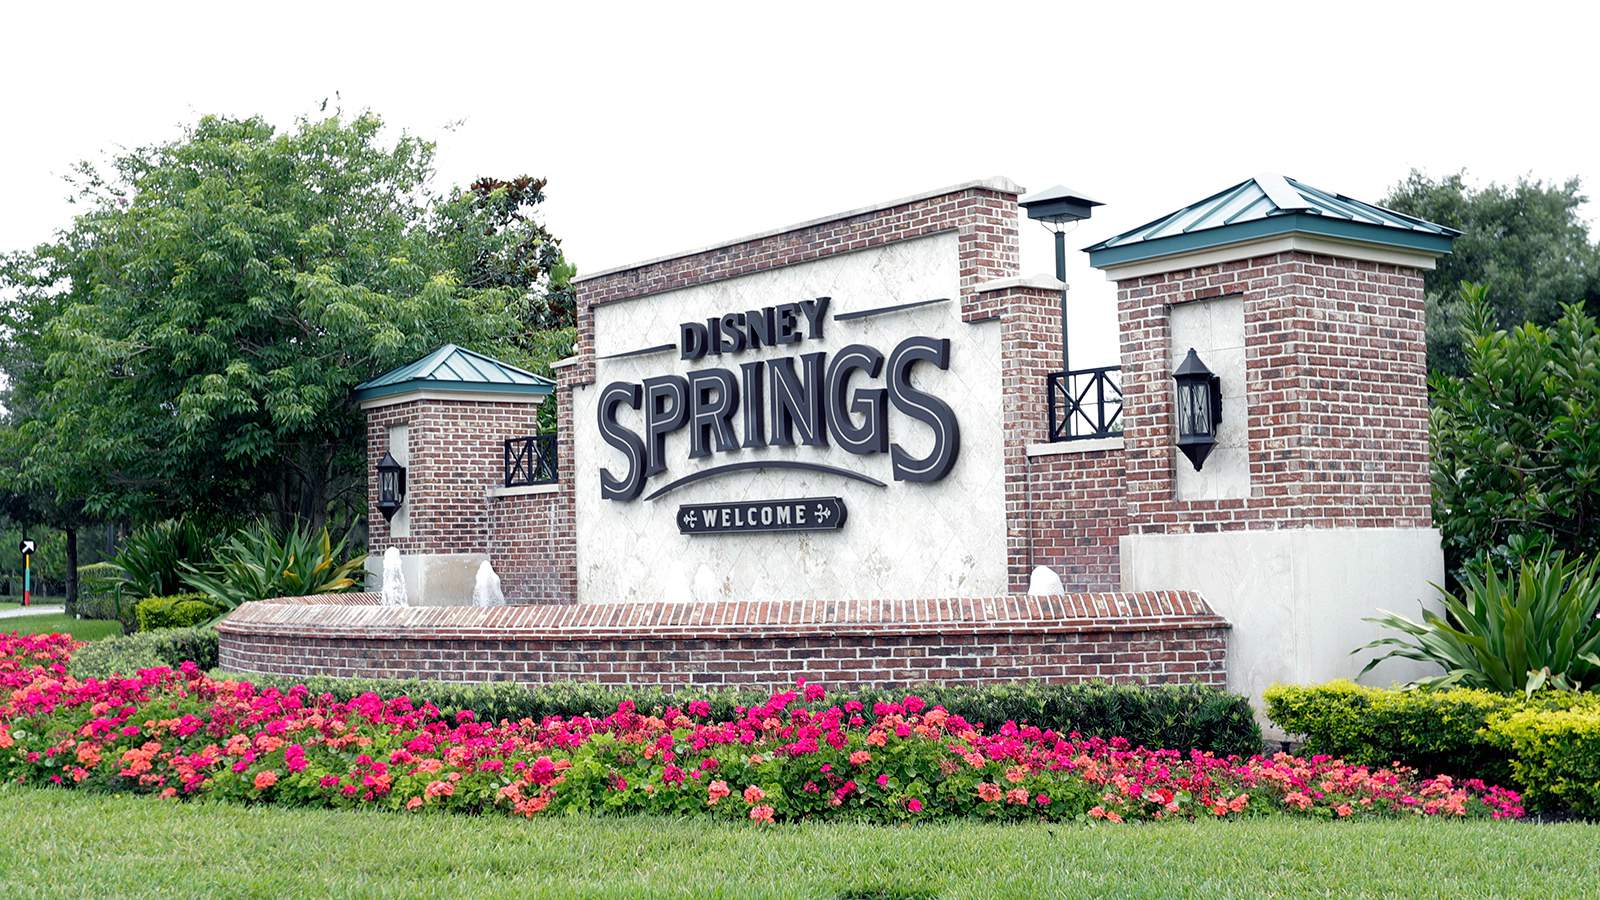 Man spends 15K on Disney Springs vacation, gets arrested after refusing temperature check